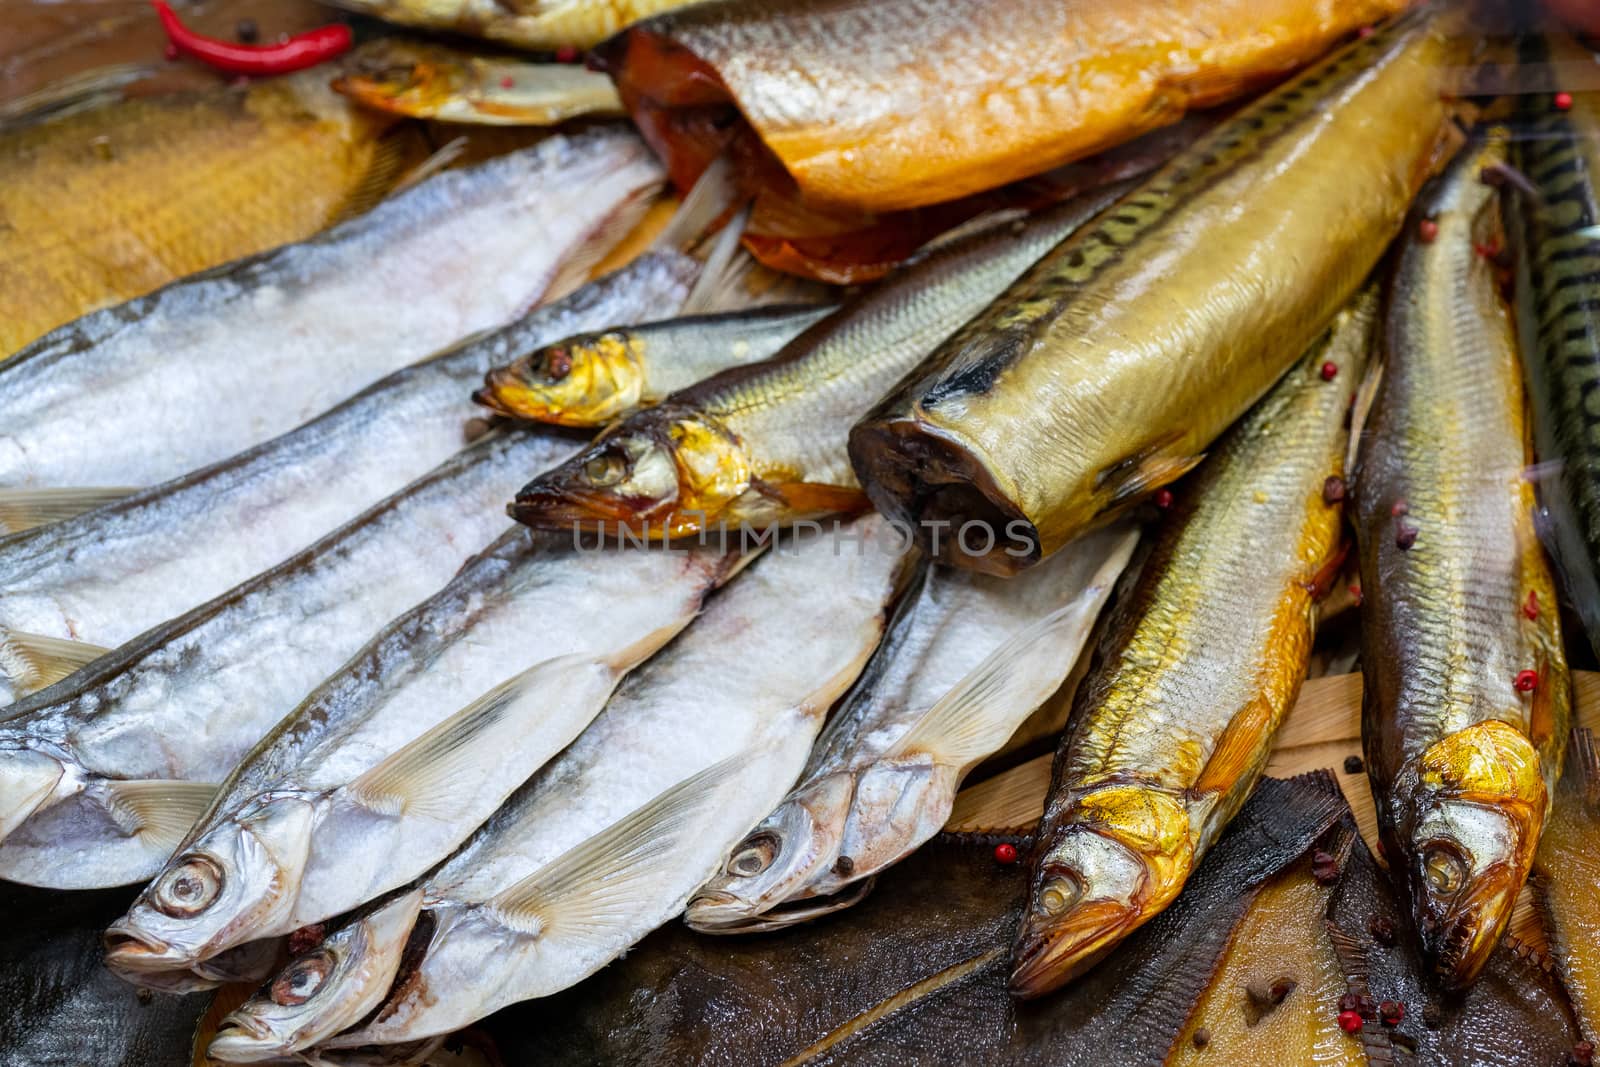 Smoked fish at the store counter. Seafood sale. Fish in shop window.